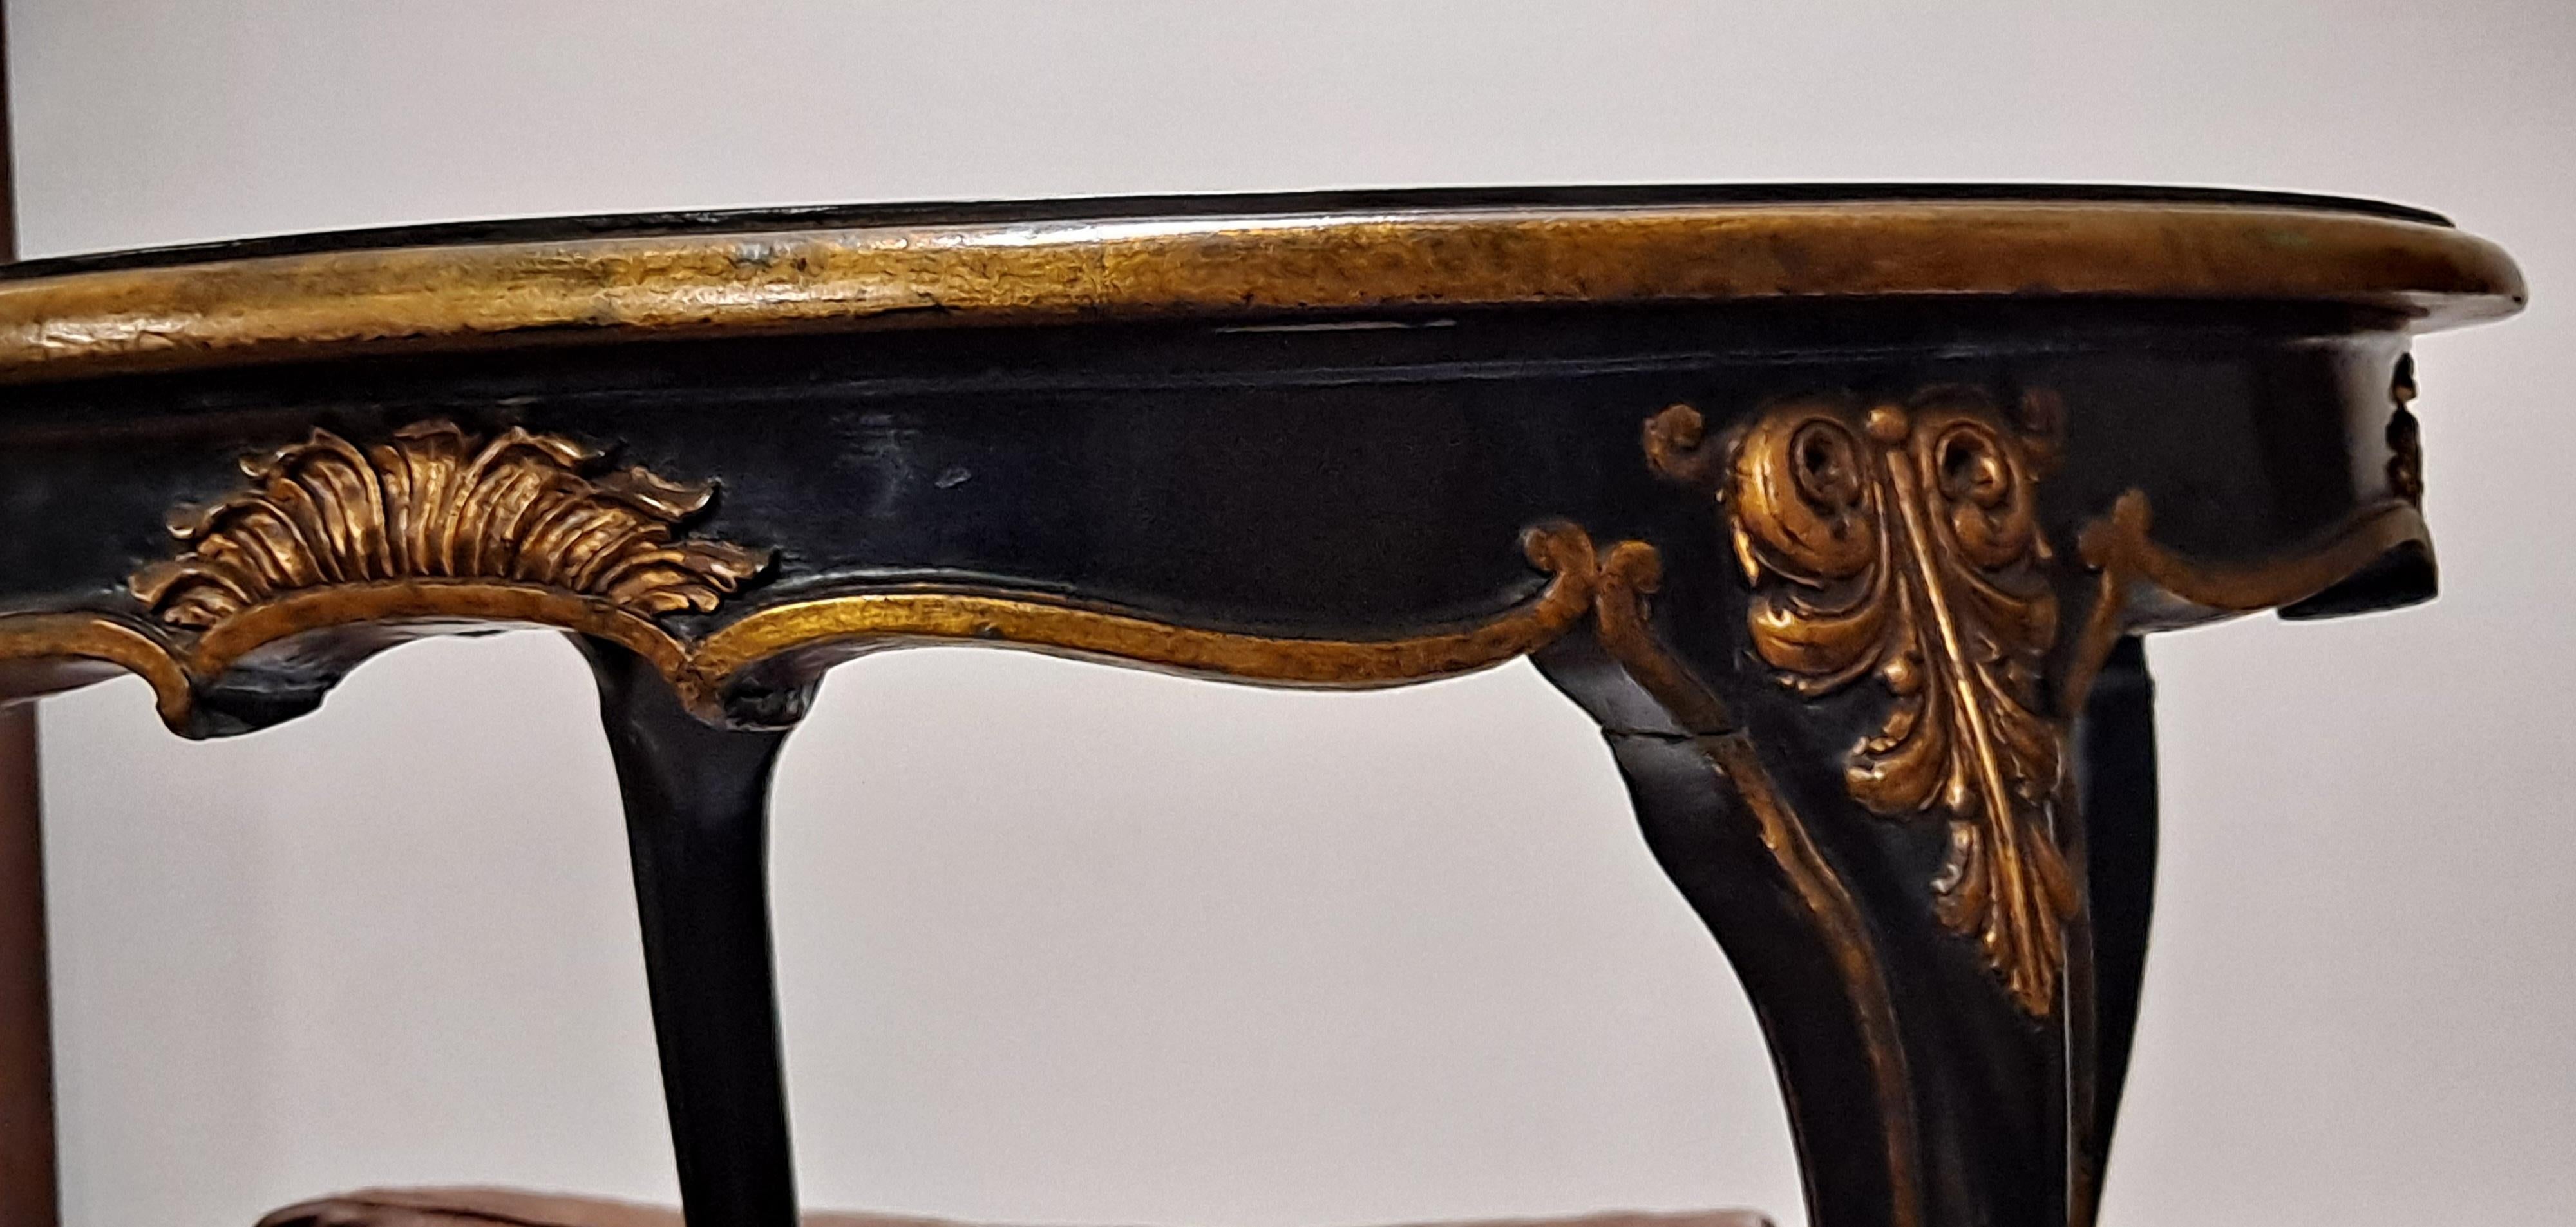 Floral Chinosserie Lacquered Center Table

31 x 28